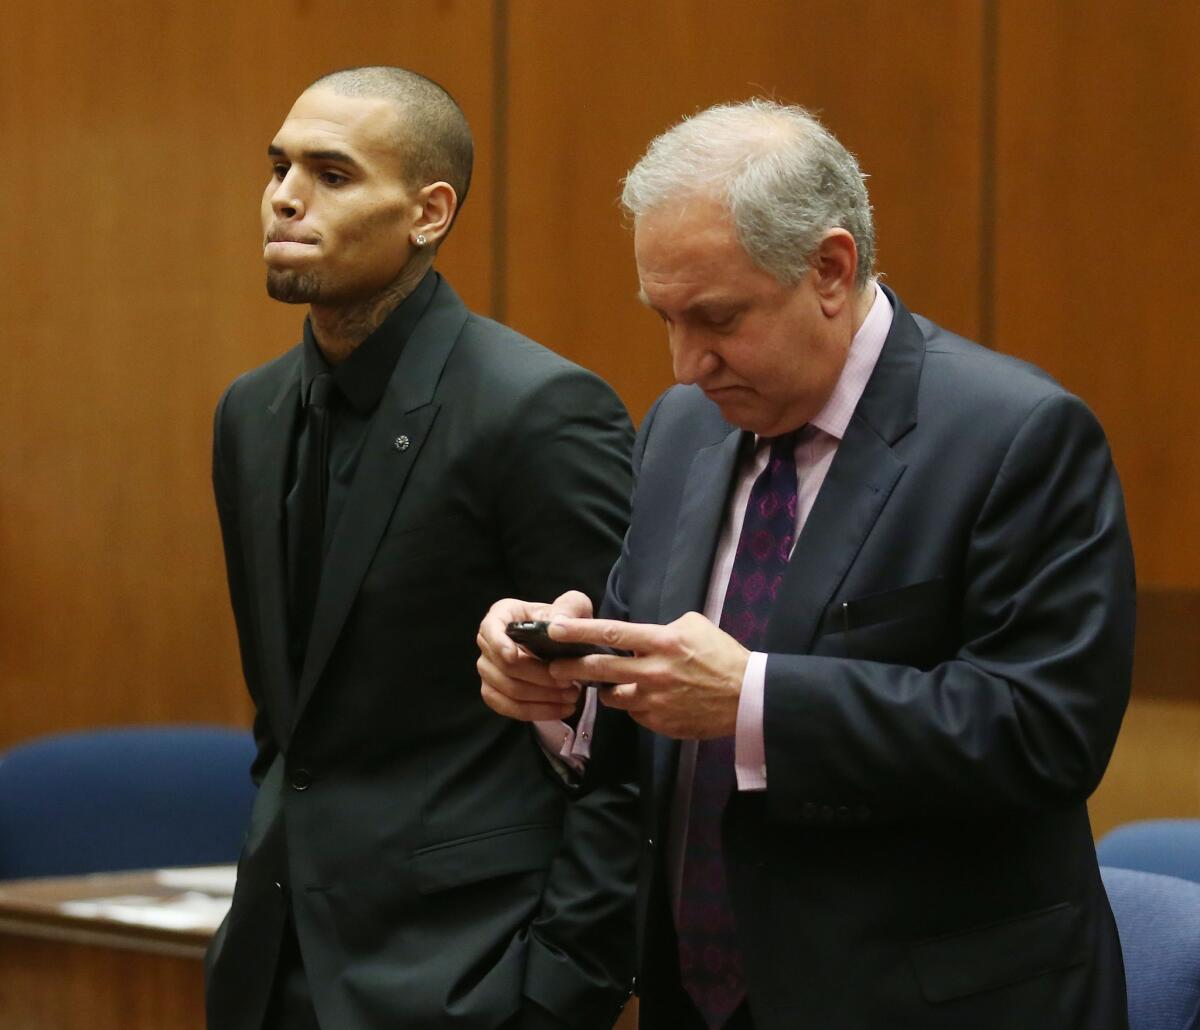 Recording artist Chris Brown, left, and his attorney Mark Geragos appear in court in November.